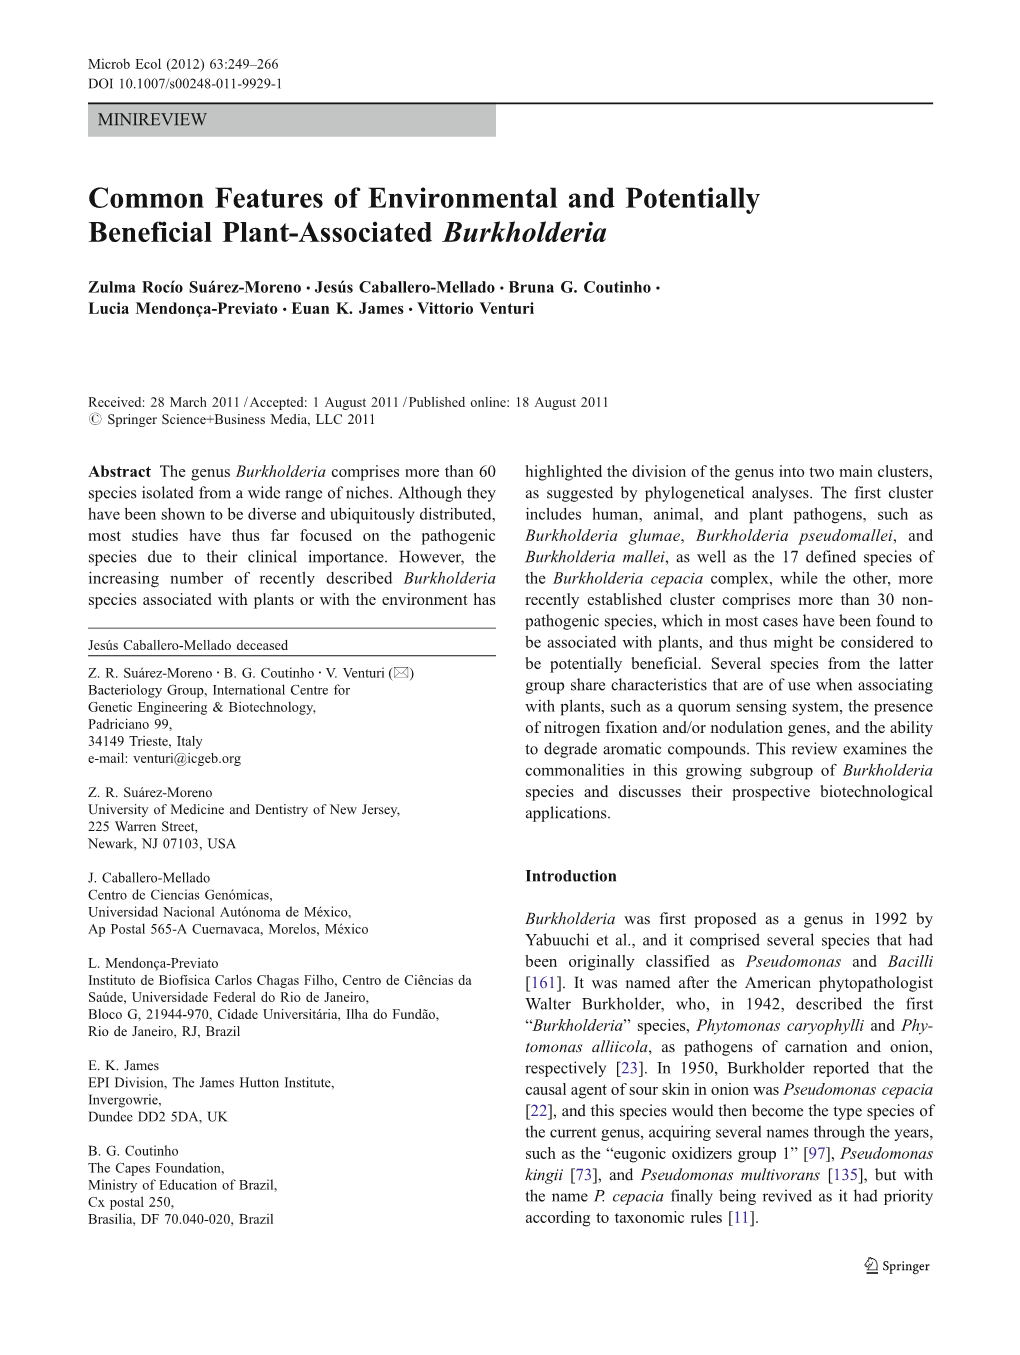 Common Features of Environmental and Potentially Beneficial Plant-Associated Burkholderia